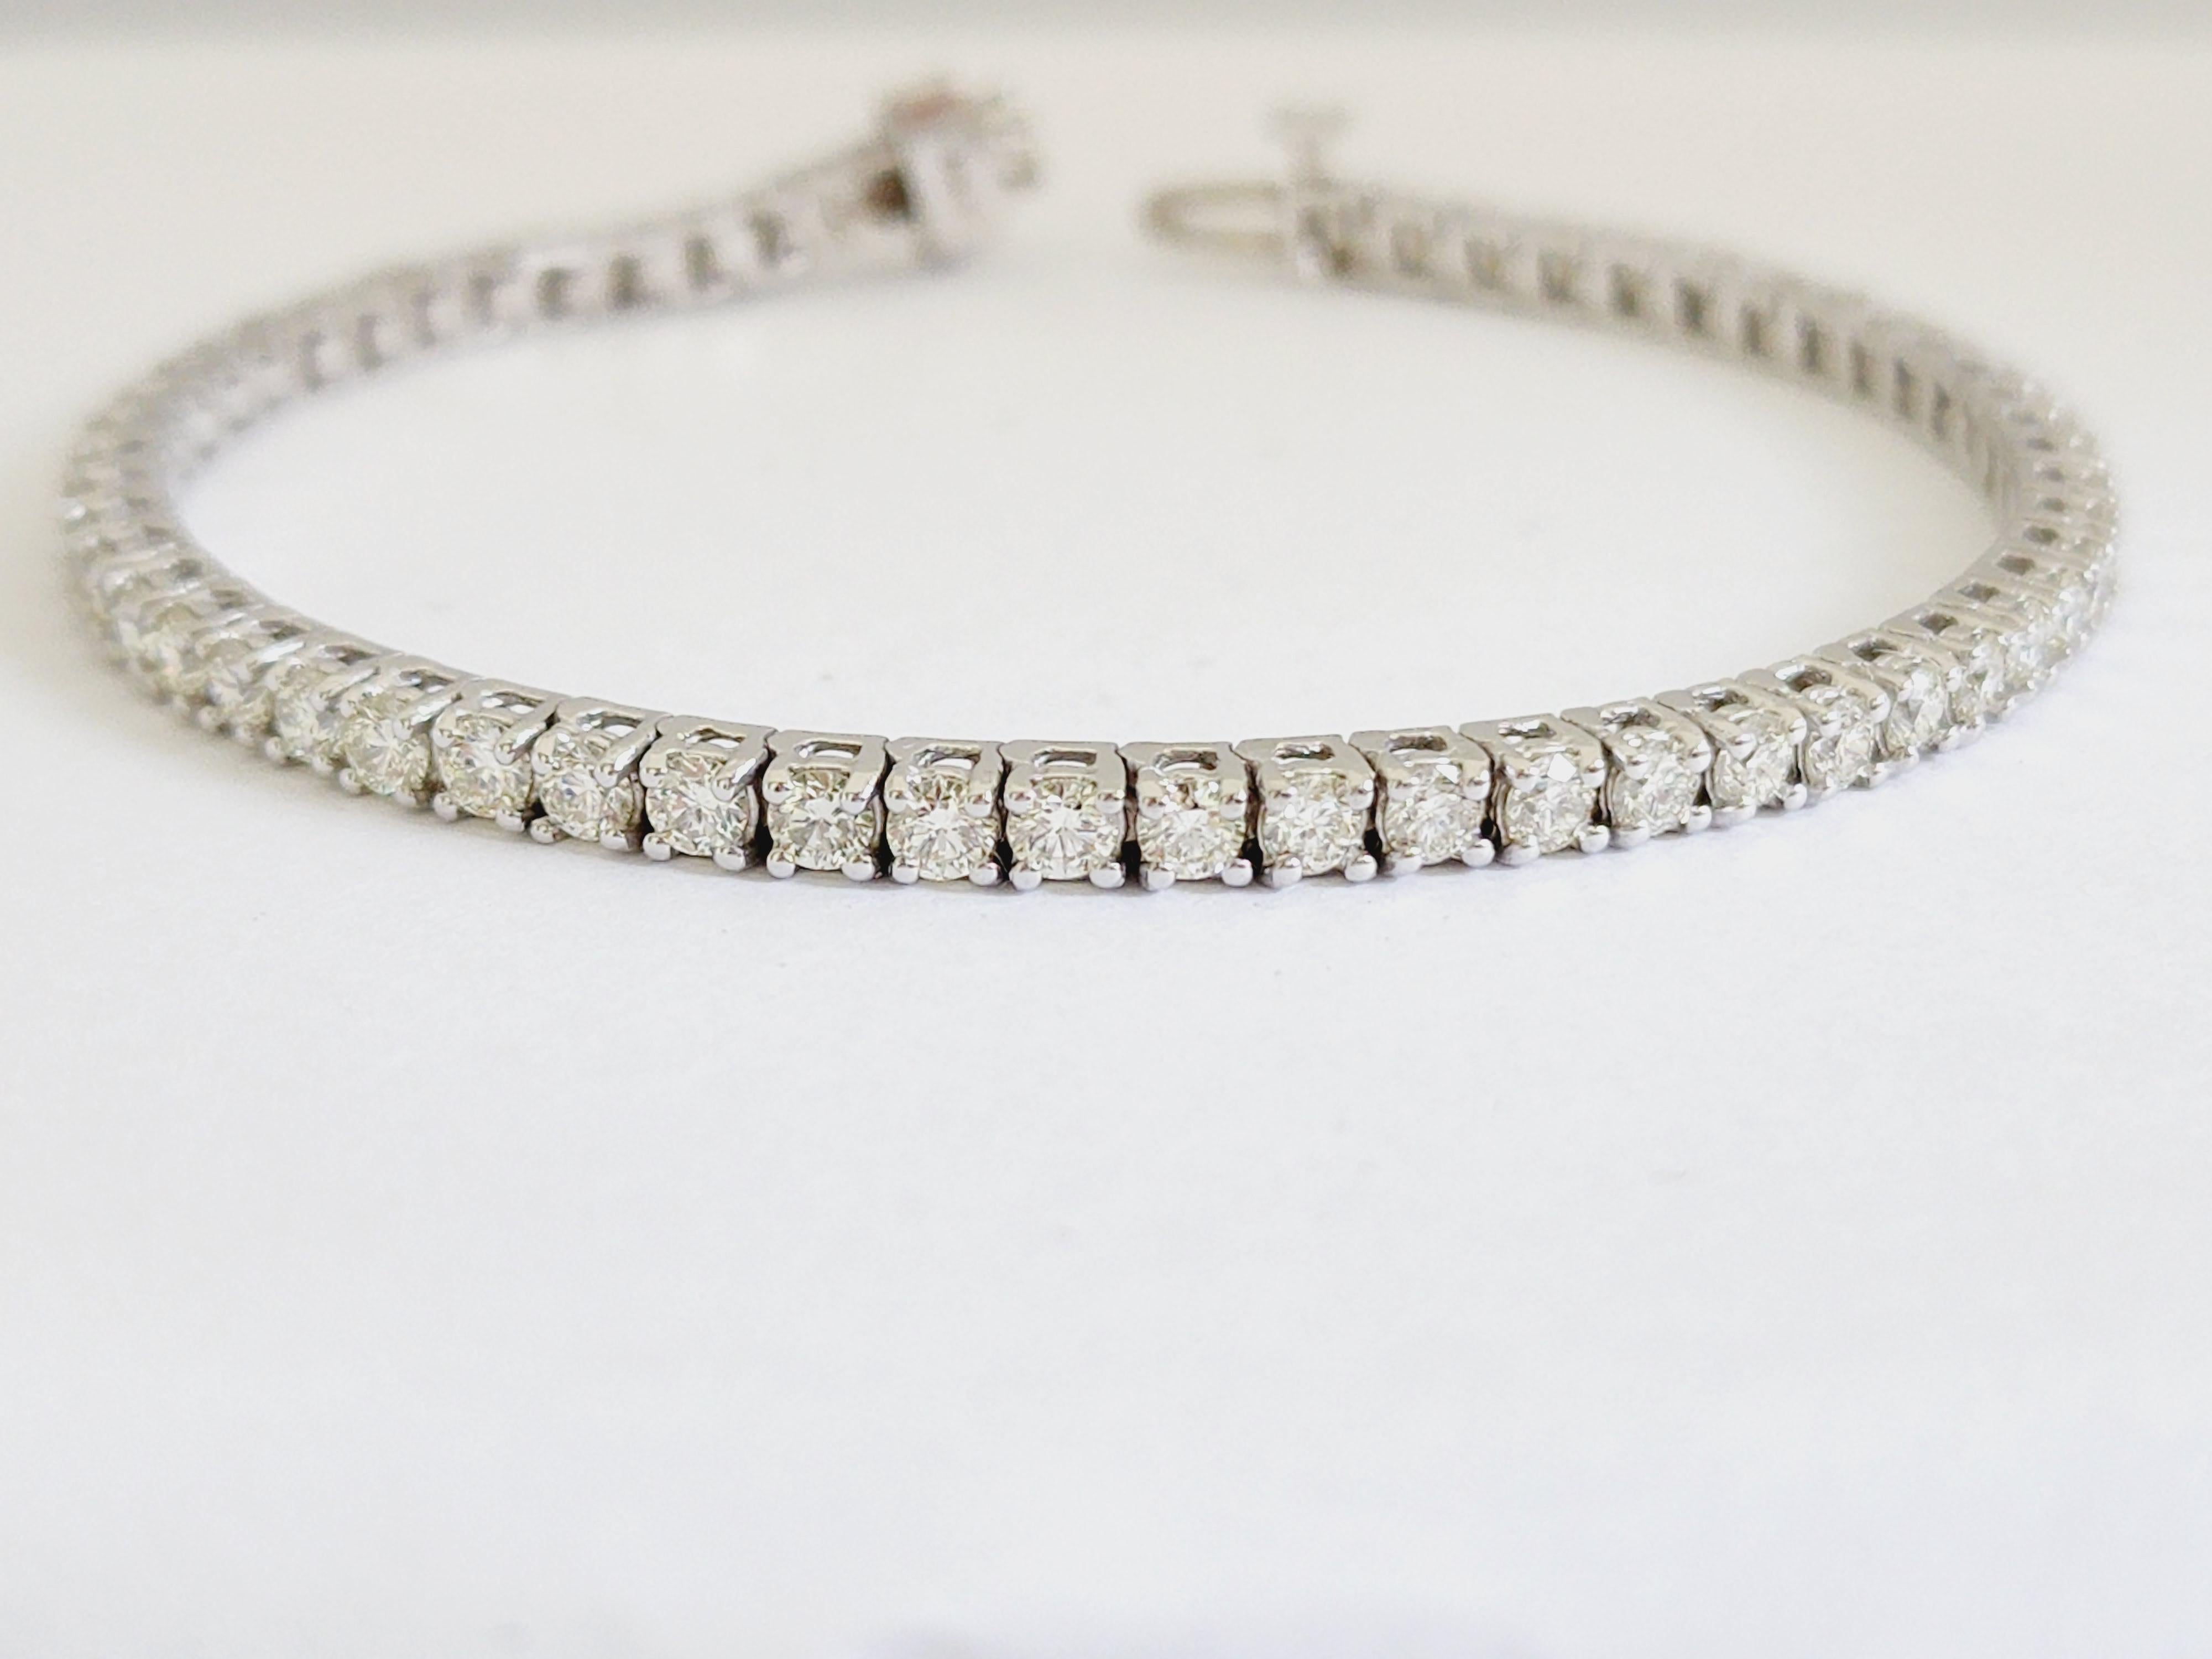 Beautiful diamond tennis bracelet, round-brilliant cut diamonds. set on 14k white gold. each stone is set in a classic four-prong style for maximum light brilliance. 7 inch length. Average Color G-H, Clarity VVS. Every day style. Extraordinary